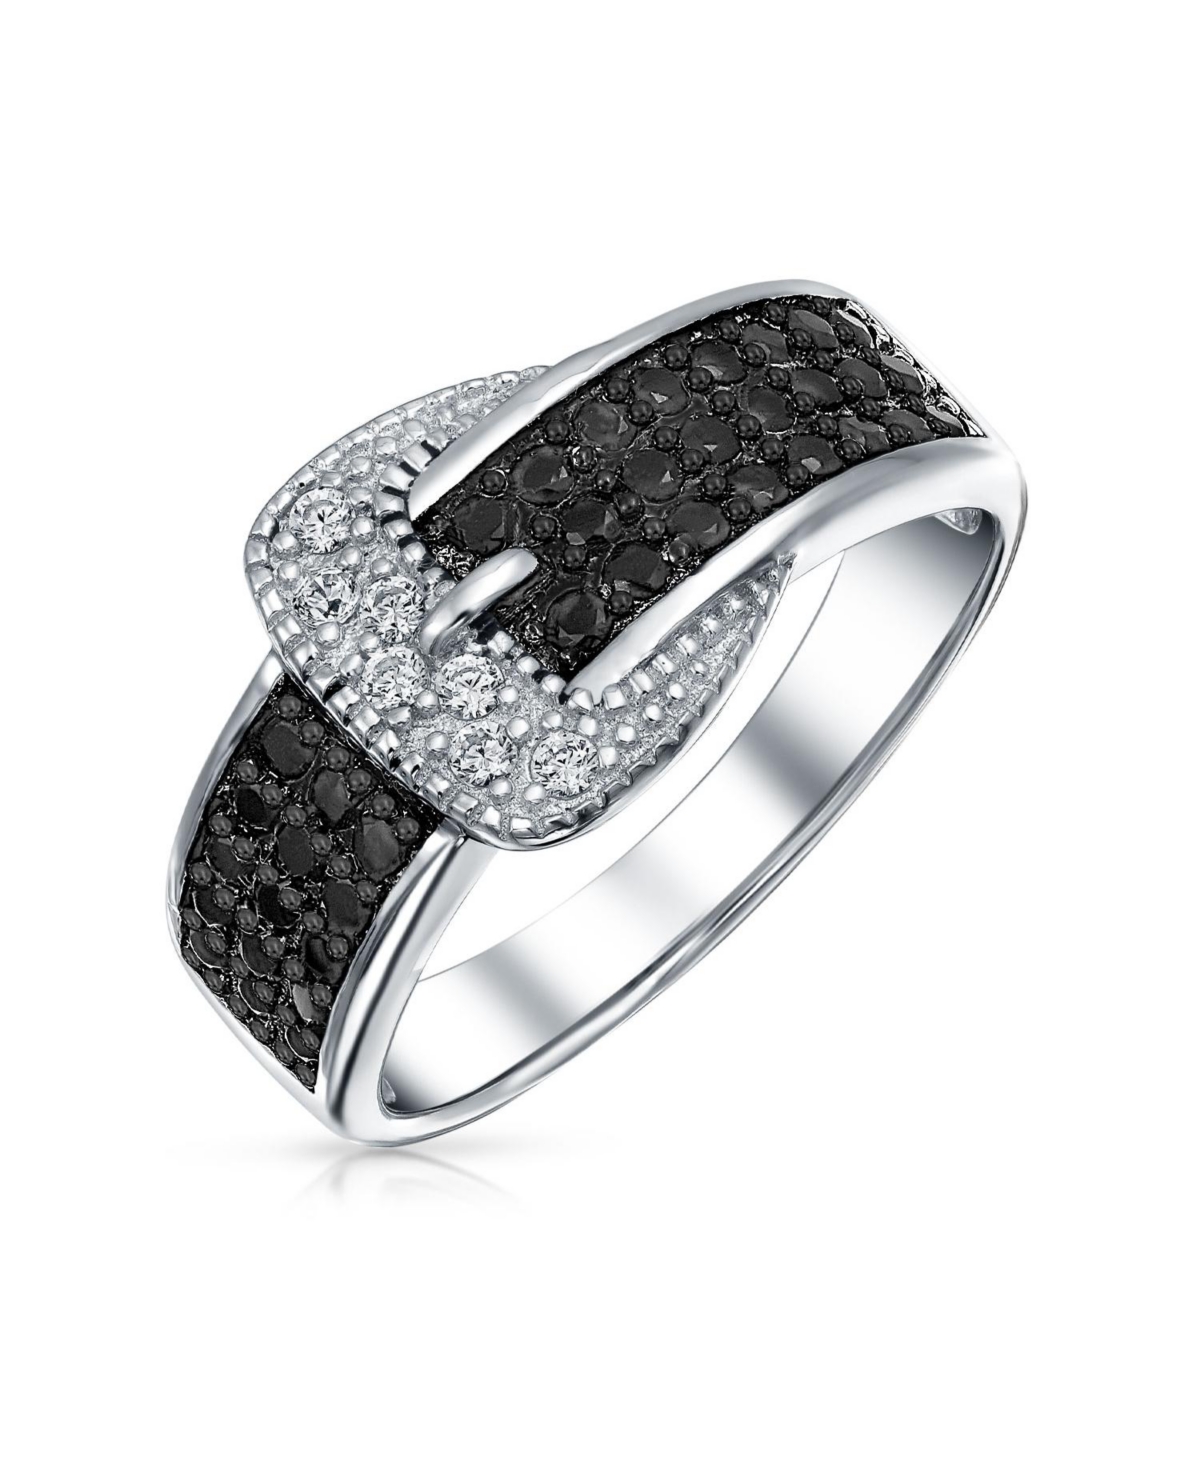 Trendy Fashion Pave Cubic Zirconia Black Cz Statement Belt Buckle Band Ring For Women .925 Sterling Silver - Silver